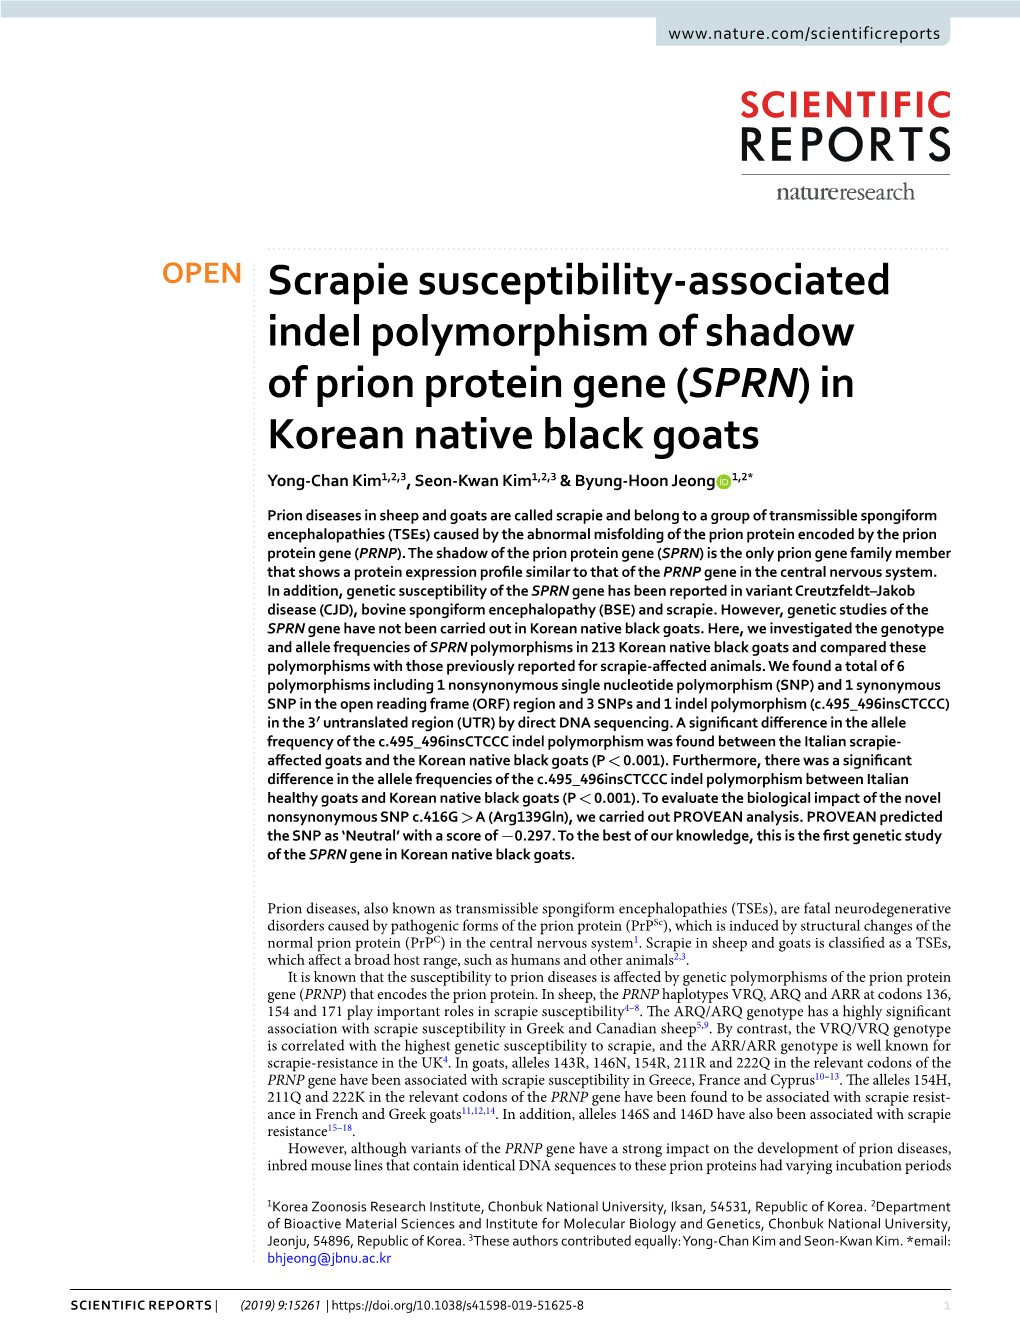 Scrapie Susceptibility-Associated Indel Polymorphism of Shadow of Prion